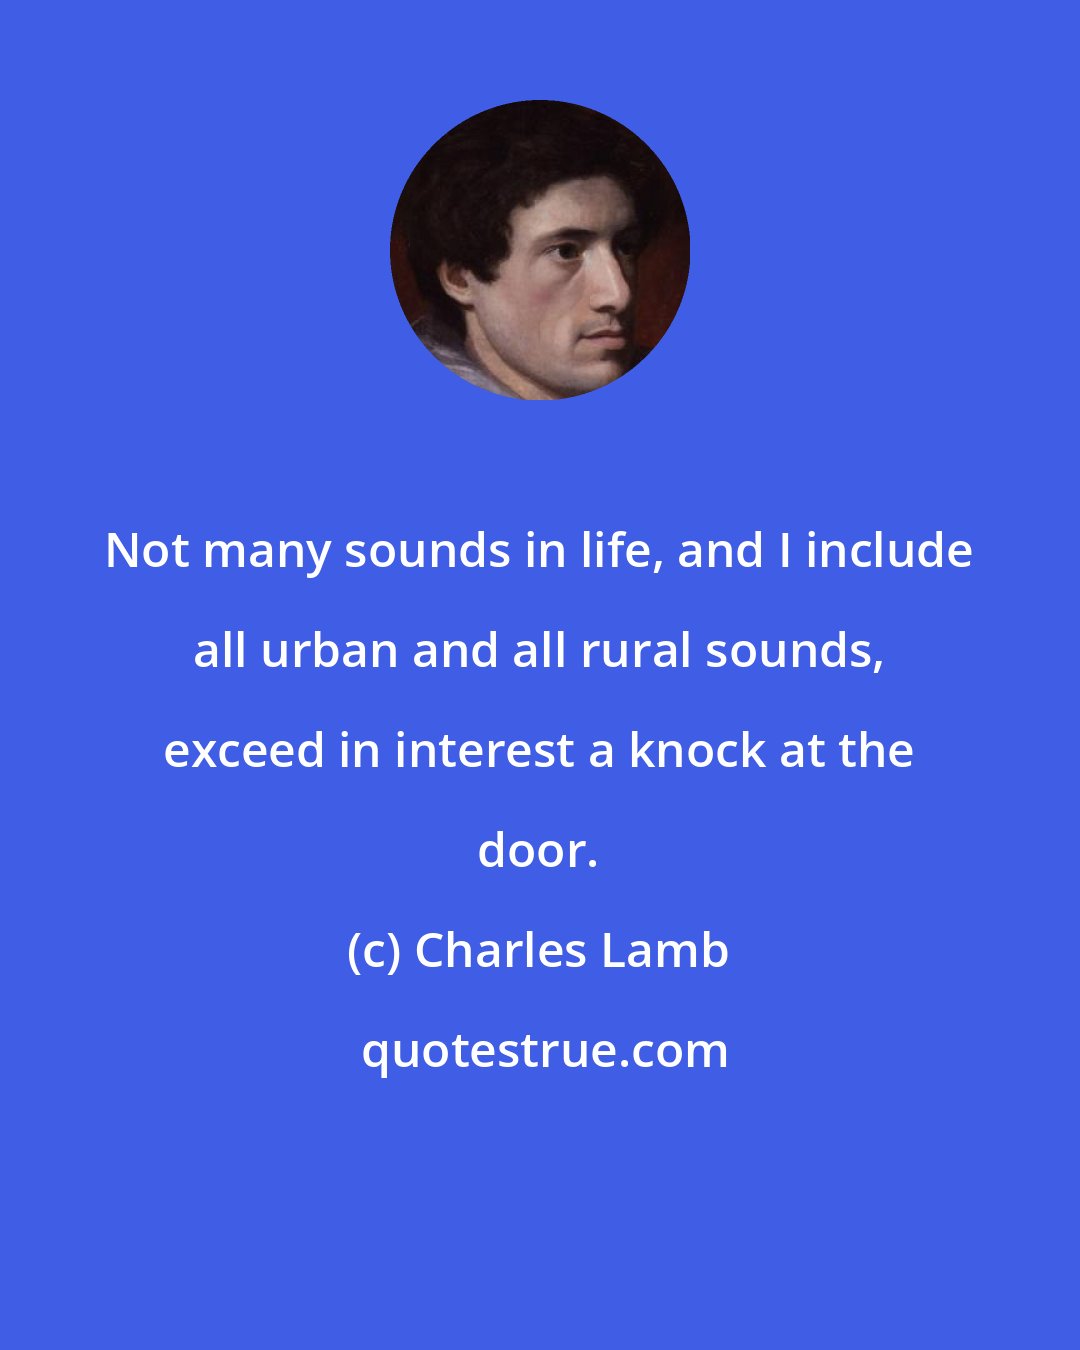 Charles Lamb: Not many sounds in life, and I include all urban and all rural sounds, exceed in interest a knock at the door.